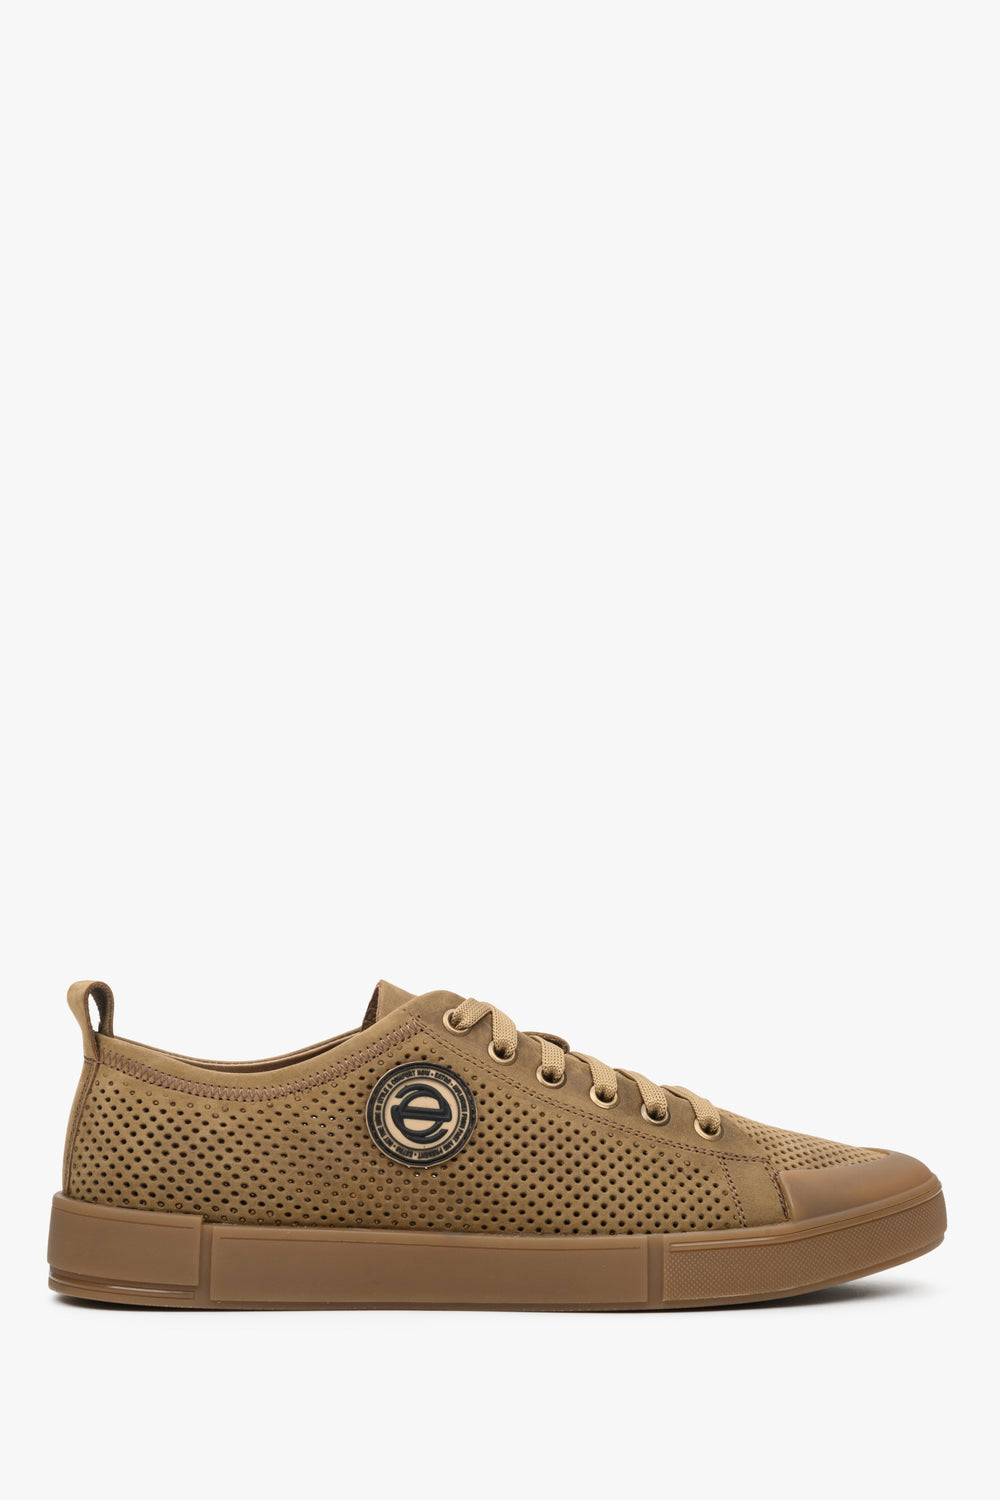 Men's Brown Sneakers made of Genuine Leather with Perforations Estro ER00112635.